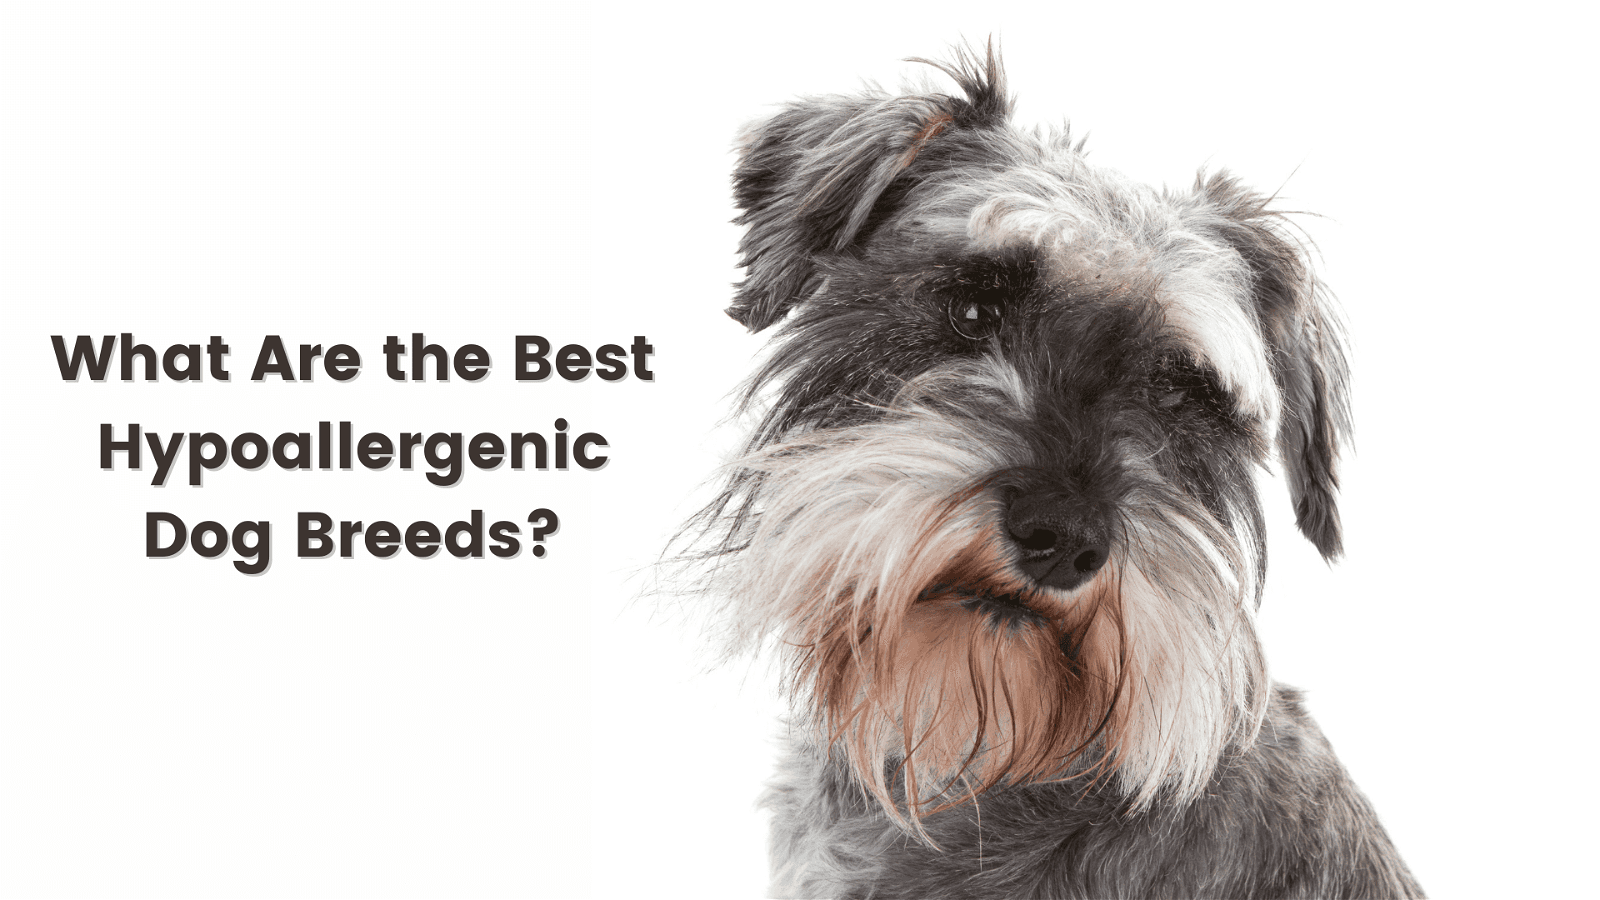 A fluffy gray and white dog is photographed next to text asking about the best hypoallergenic dog breeds.